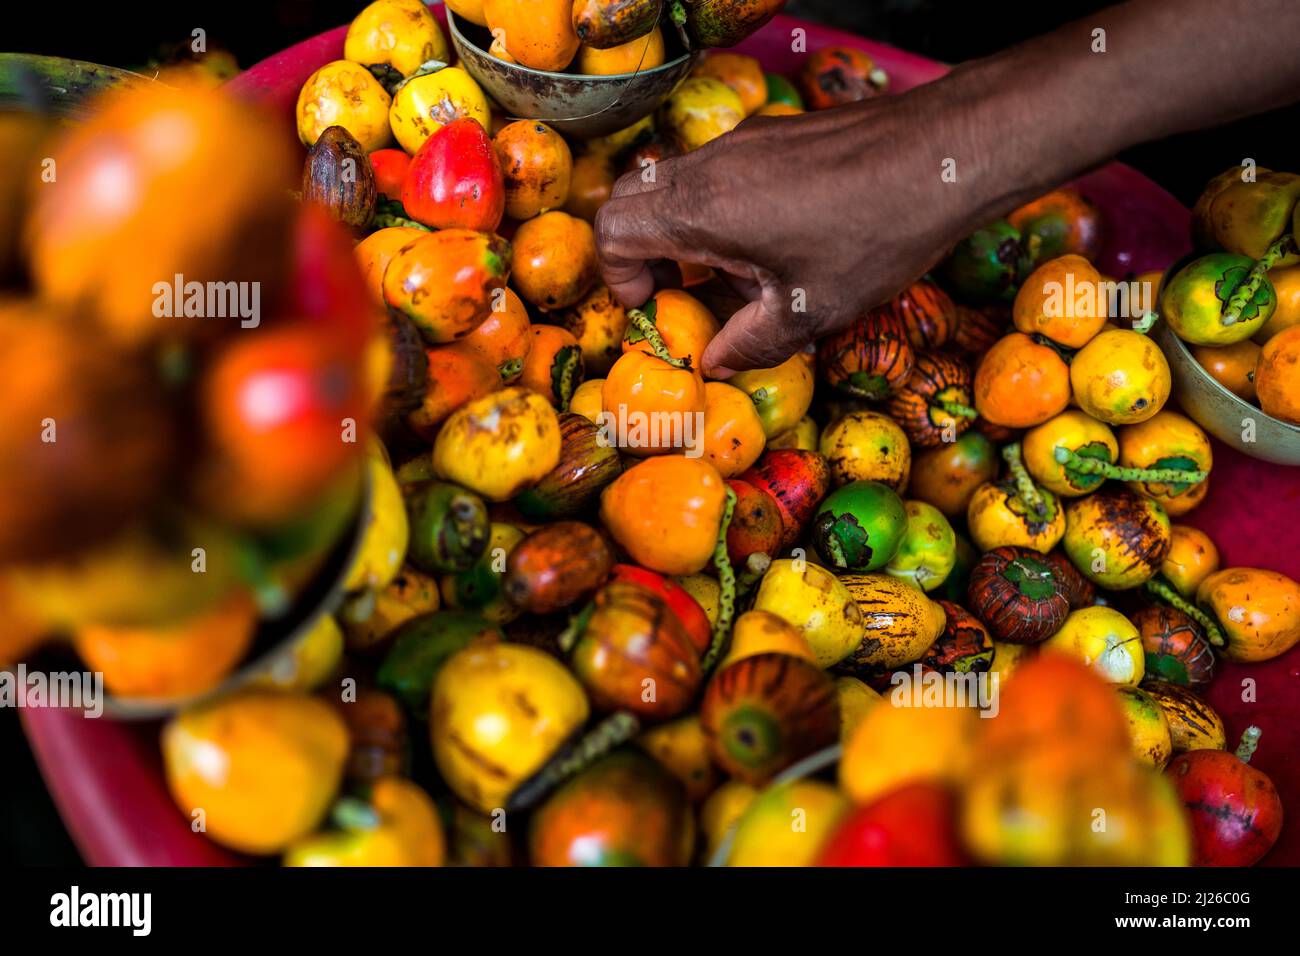 An Afro-Colombian woman sells raw chontaduro (peach palm) fruits in the street market in Quibdó, Chocó, Colombia. Stock Photo